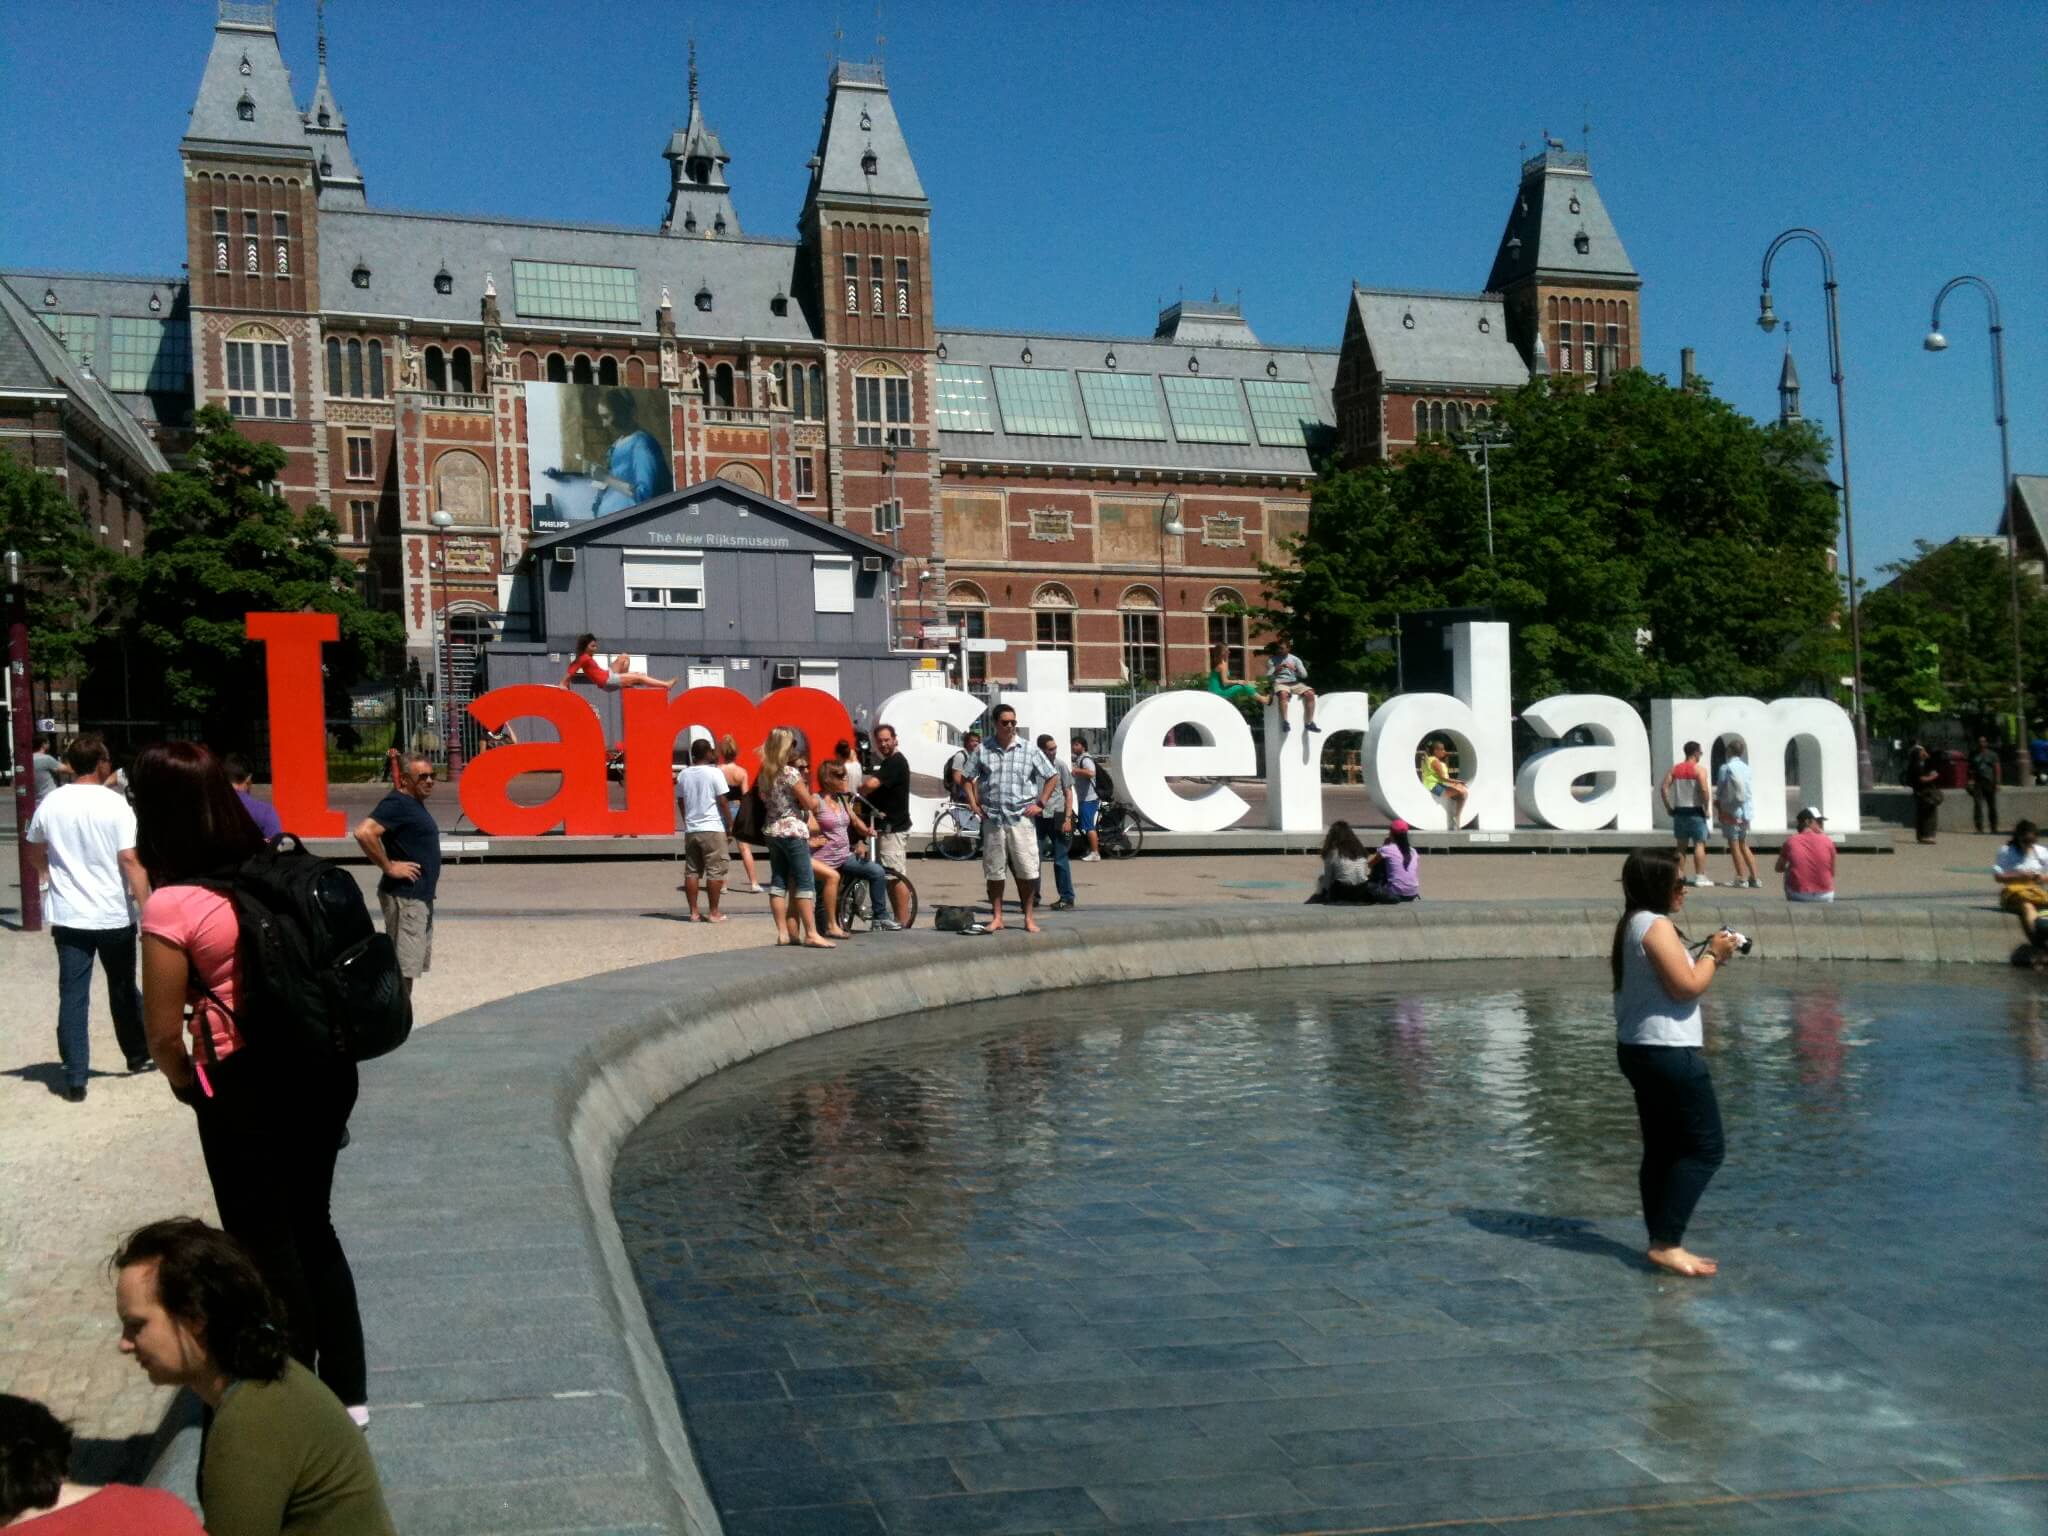 Steer clear of the stags and chavs in Amsterdam